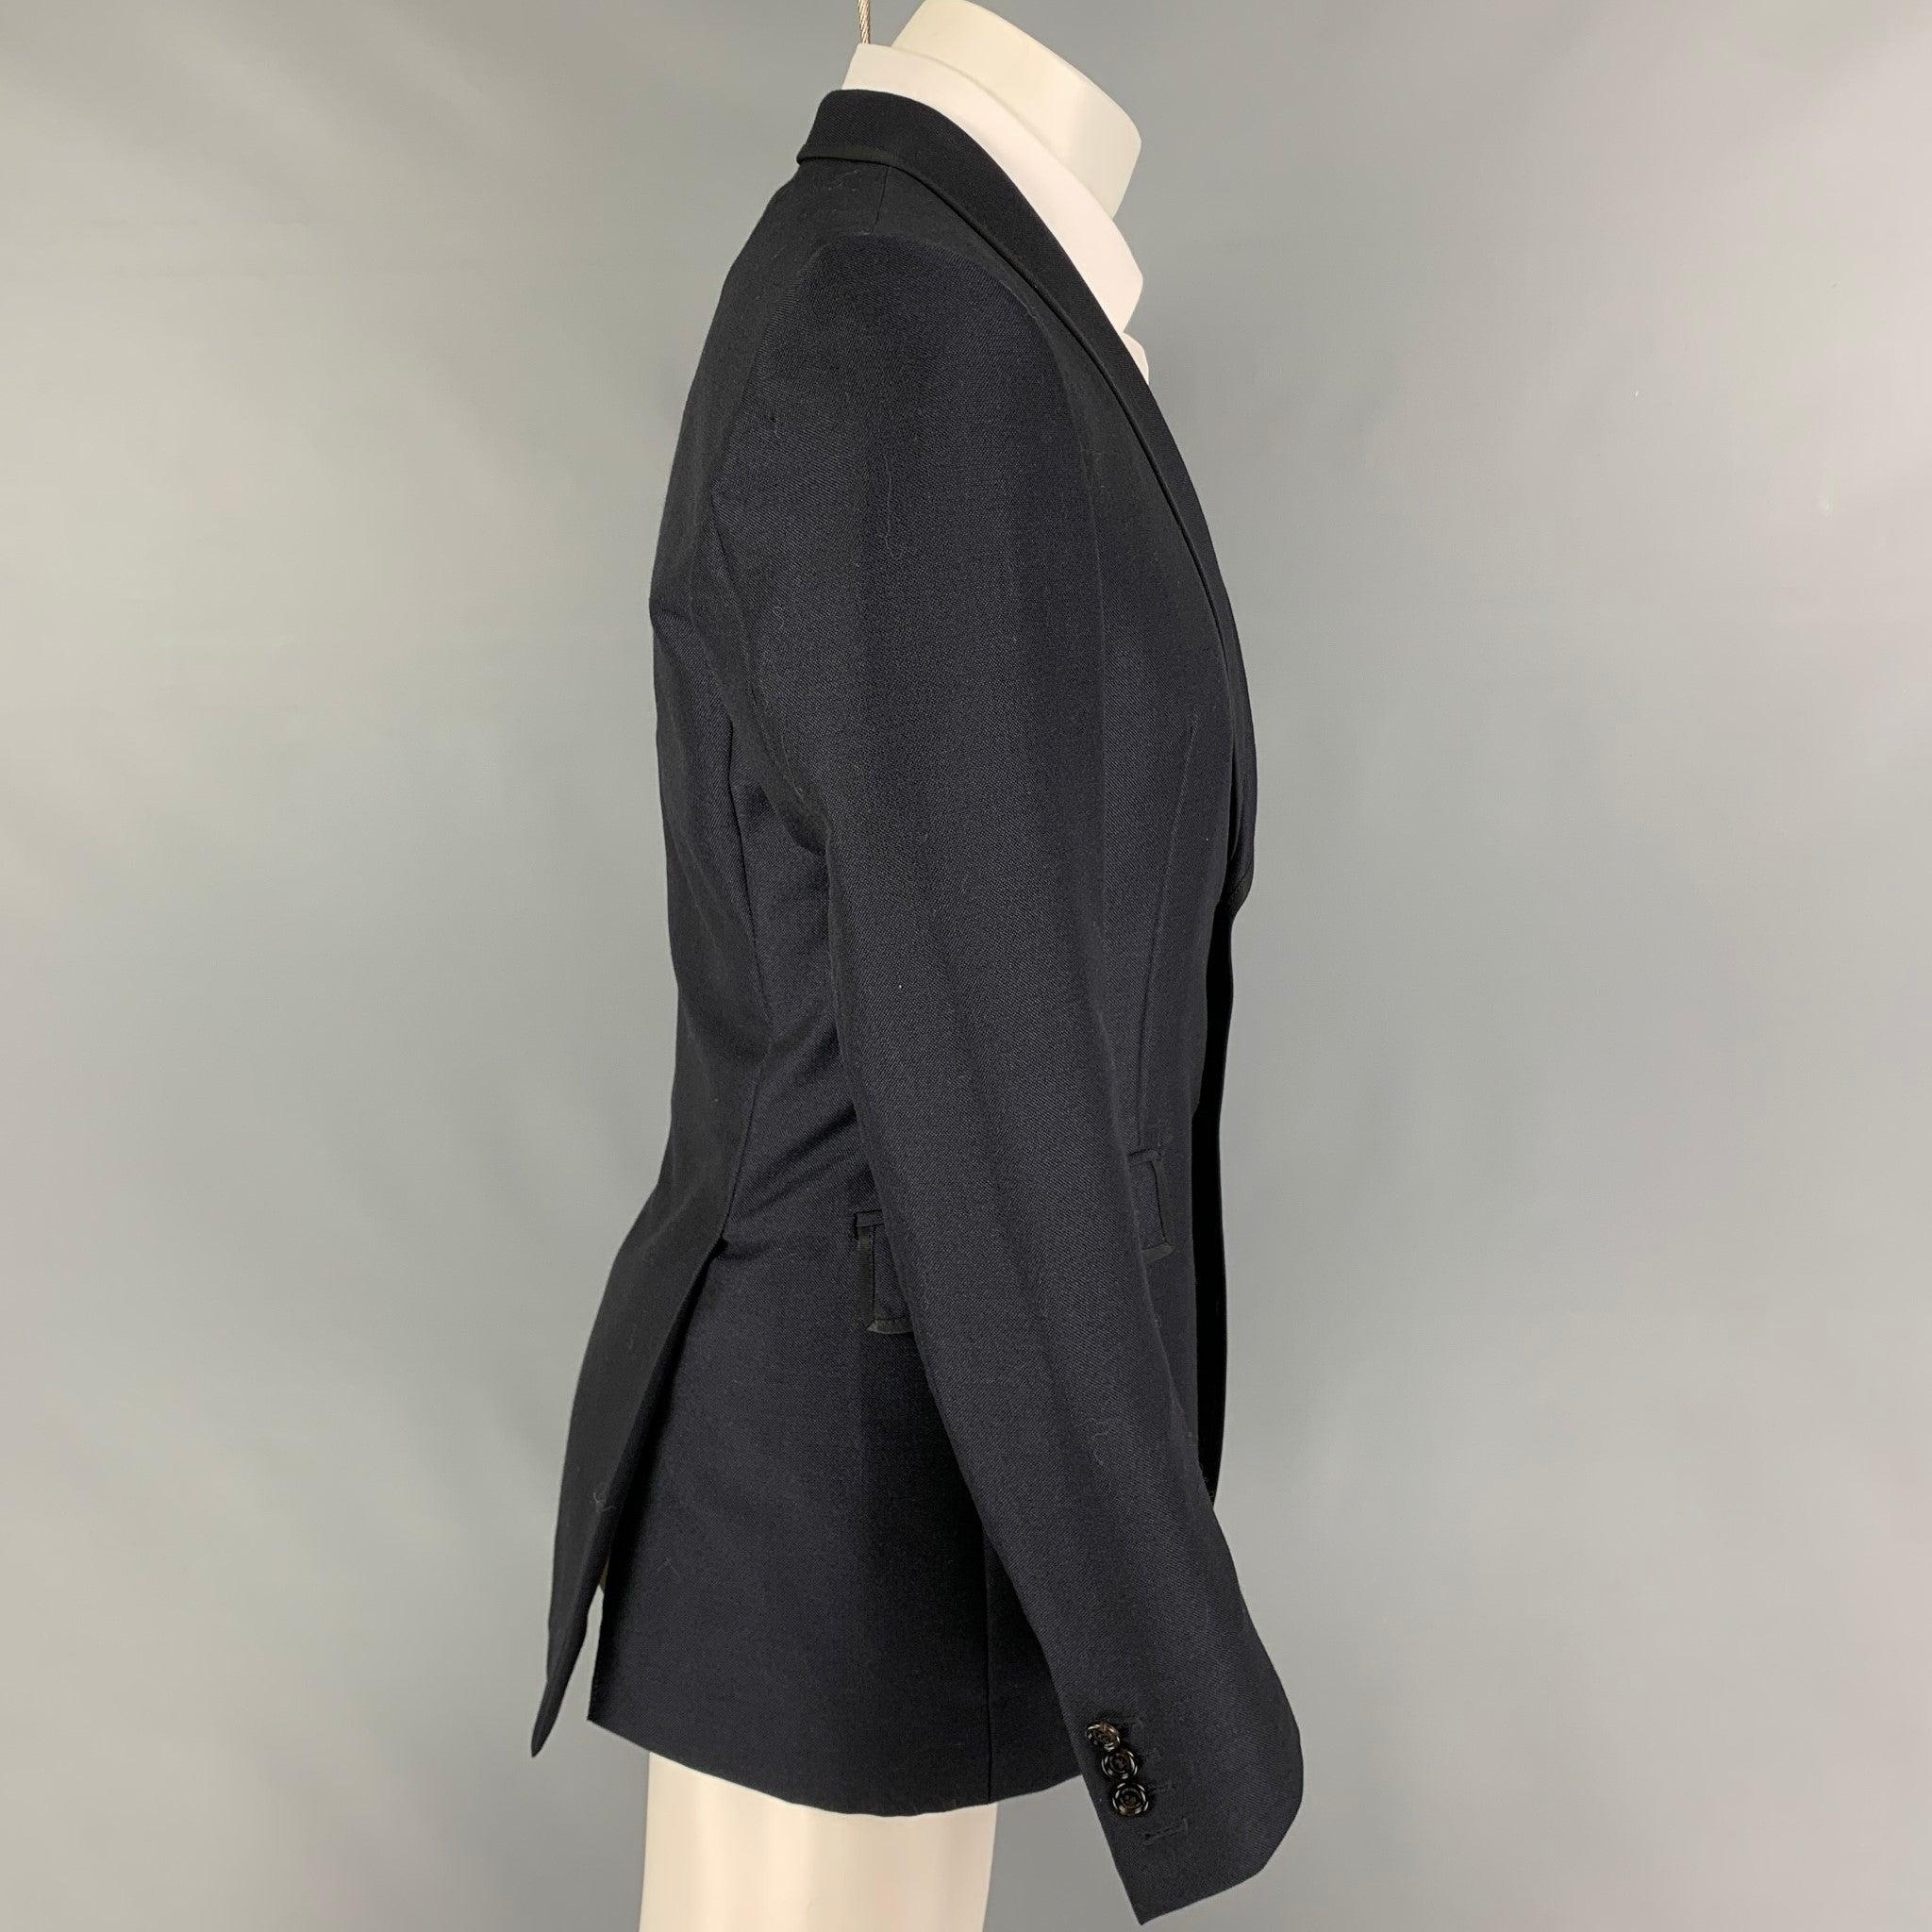 BURBERRY sport coat comes in a navy mohair / wool with a full liner featuring a shawl collar, flap pockets, double back vent, and a double button closure. Made in Italy.
Excellent
Pre-Owned Condition. 

Marked:   48 

Measurements: 
 
Shoulder:
17